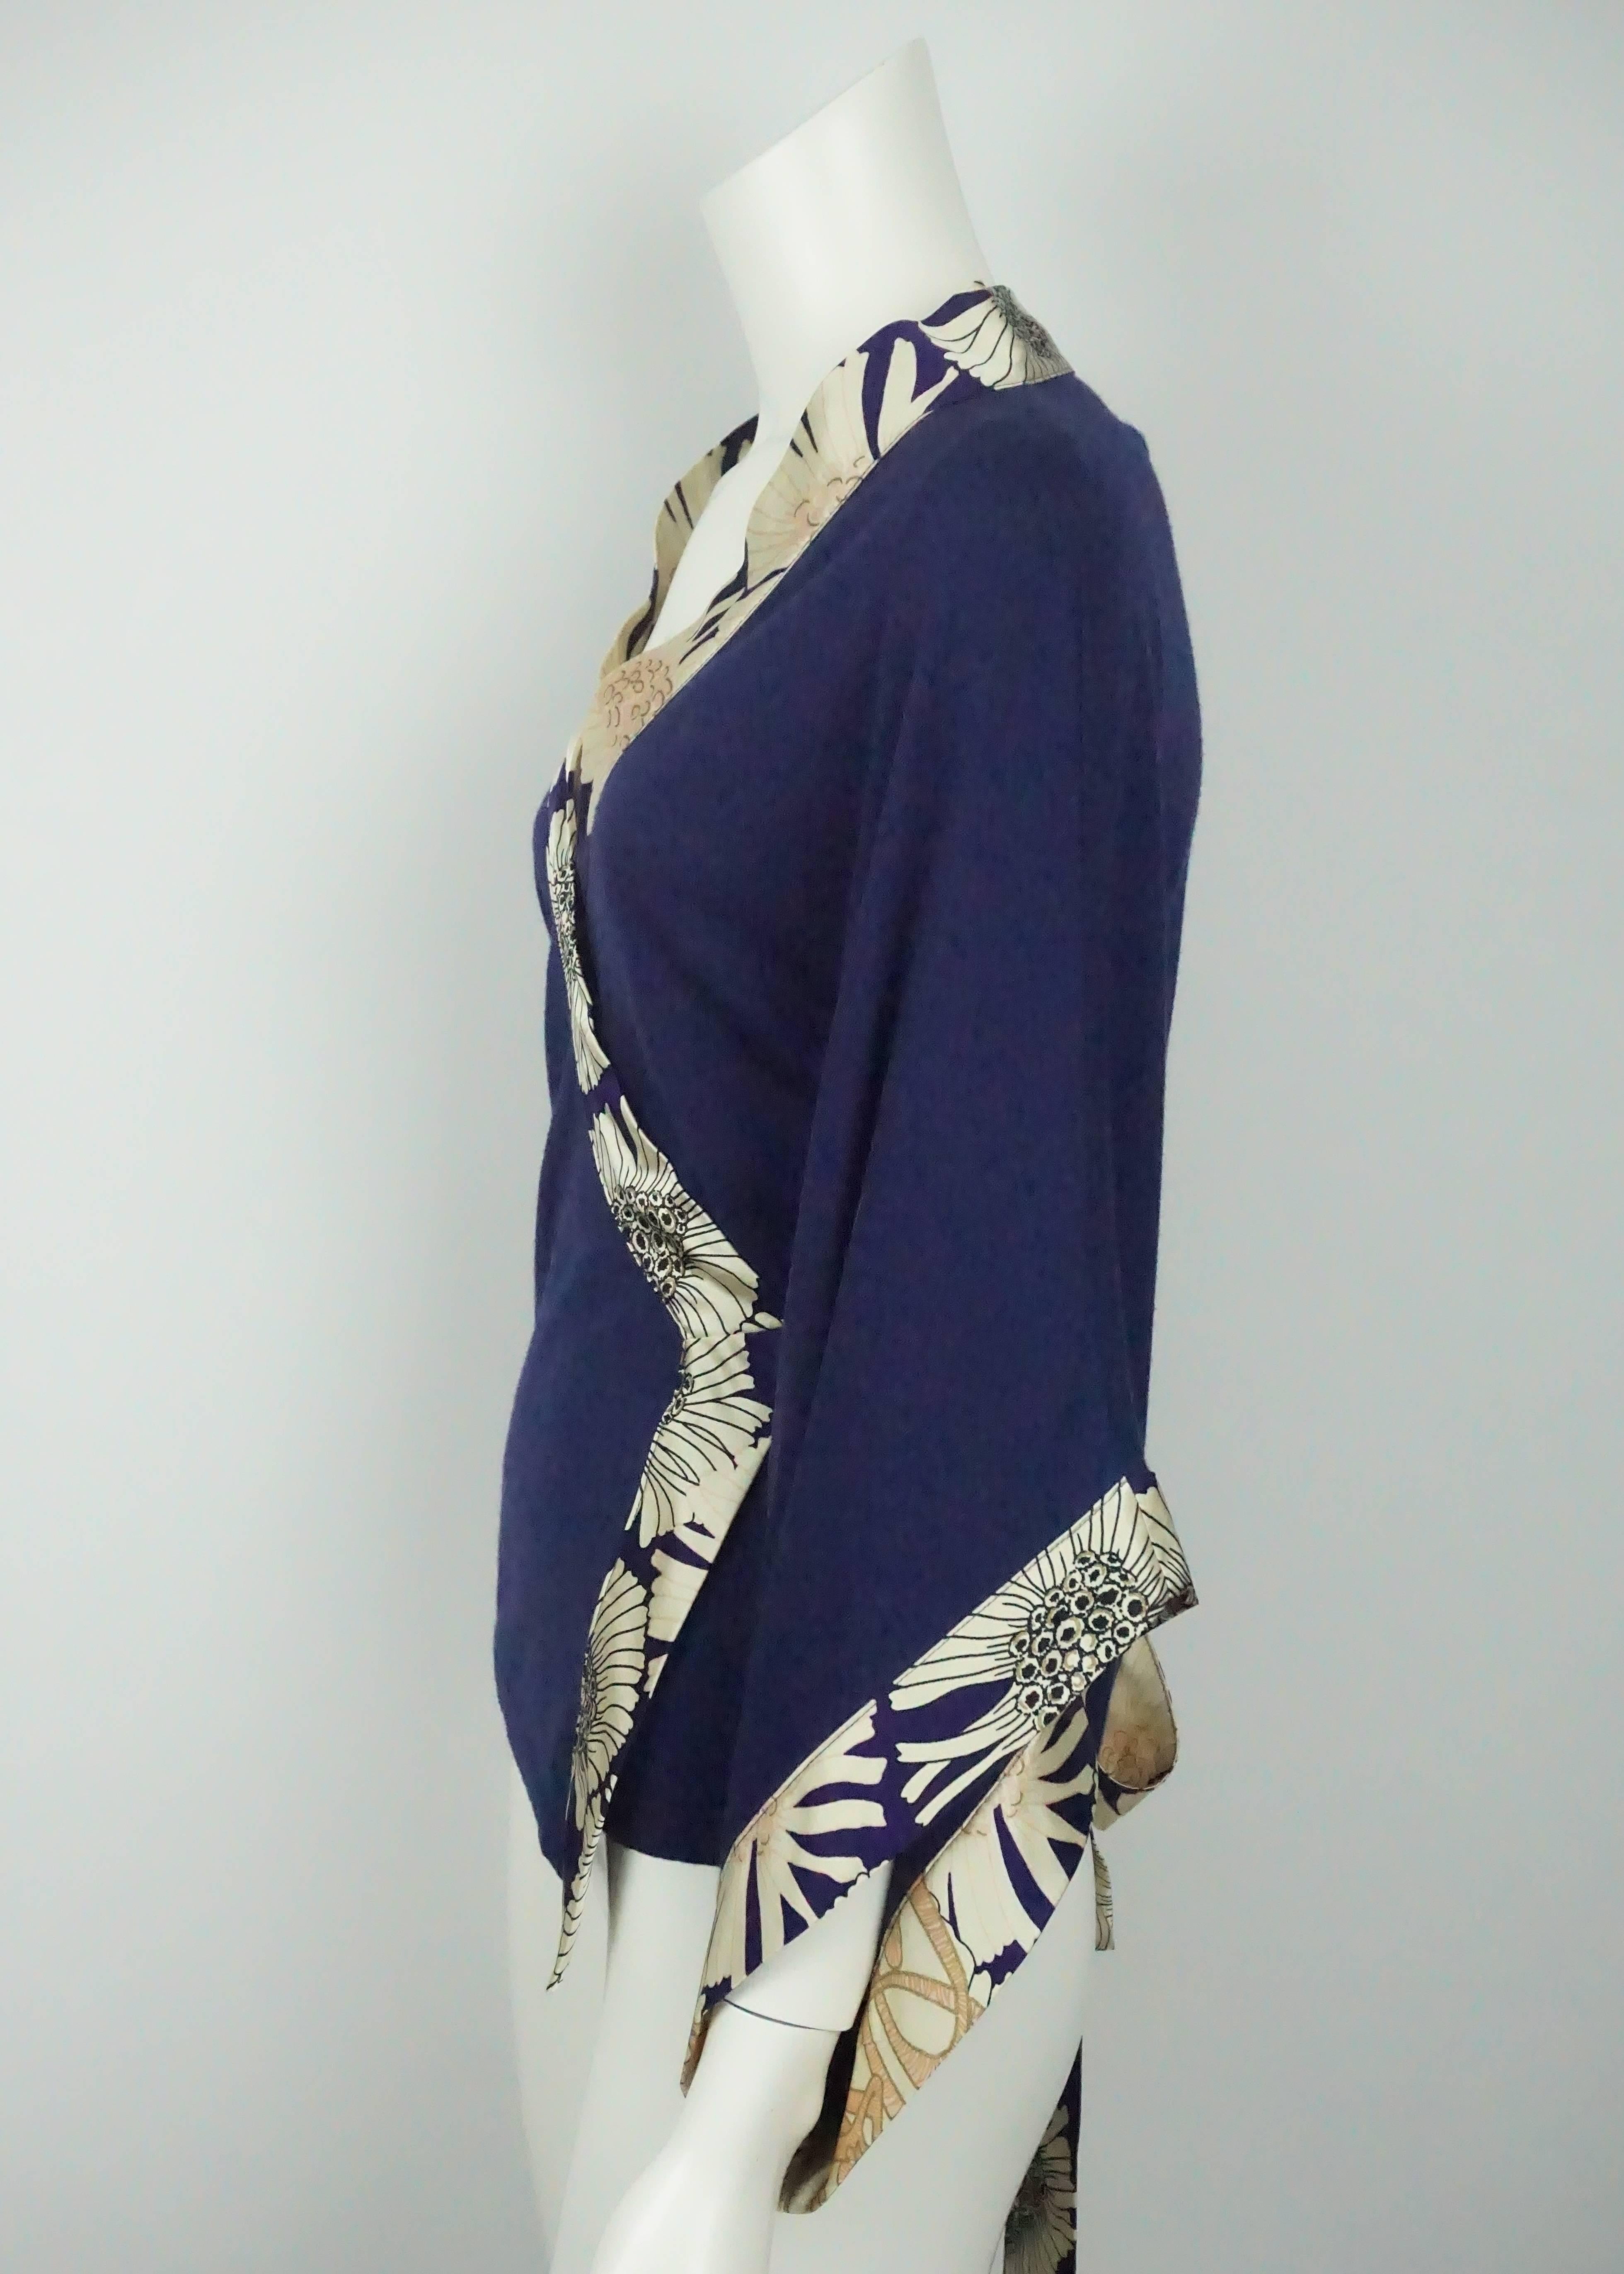 Roberto Cavalli Navy Knit Silk Cashmere Top - Medium This gorgeous cashmere and silk top is in excellent condition. The top has kimono sleeves and it has 1.75